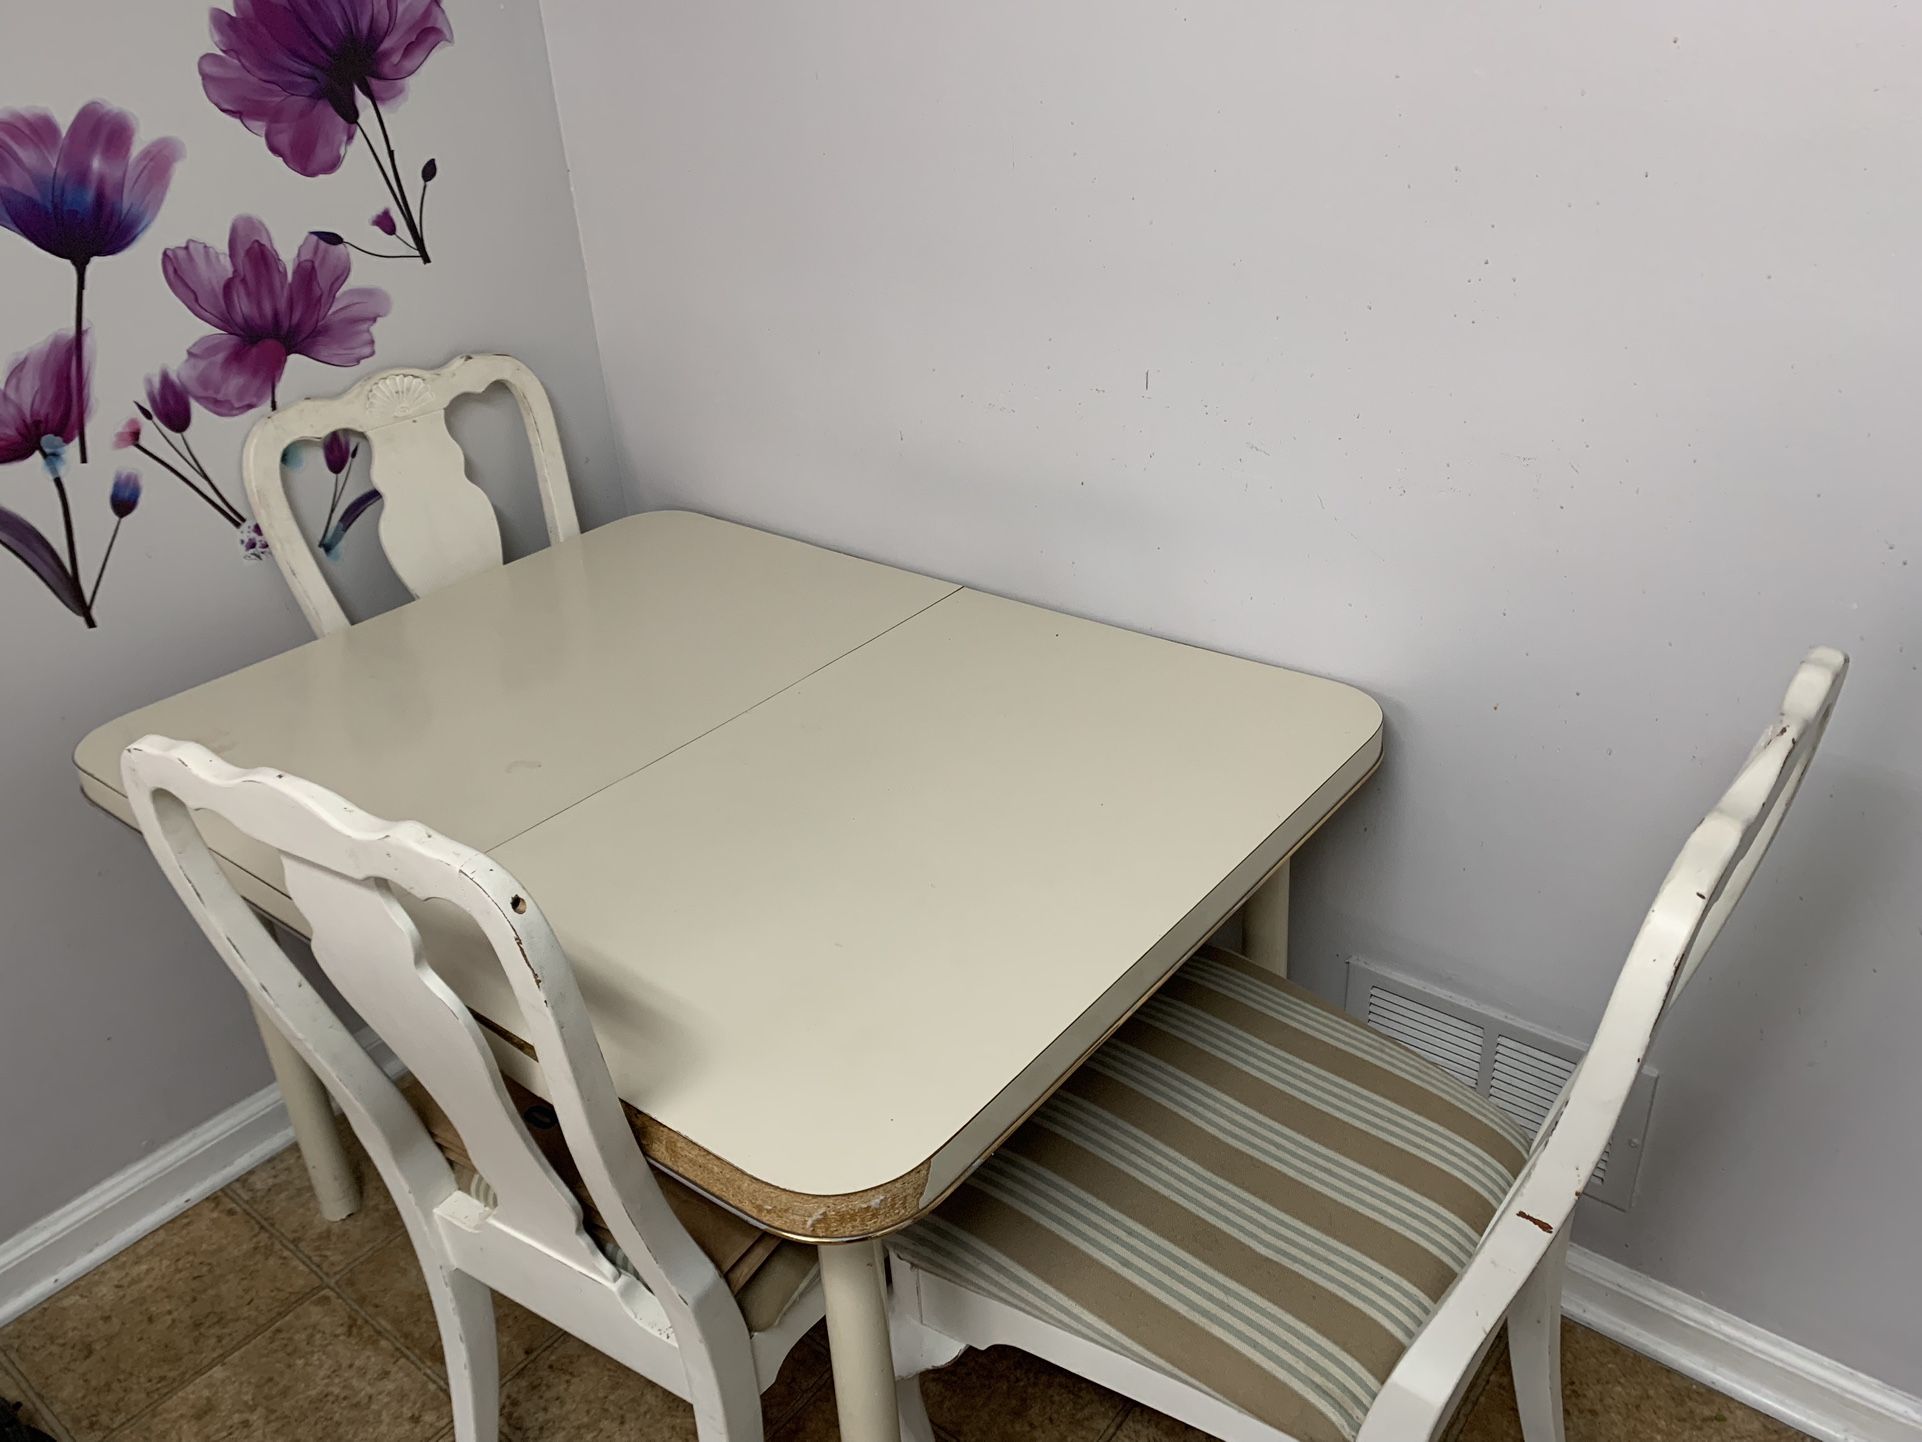 Retro Metal Table W Chairs